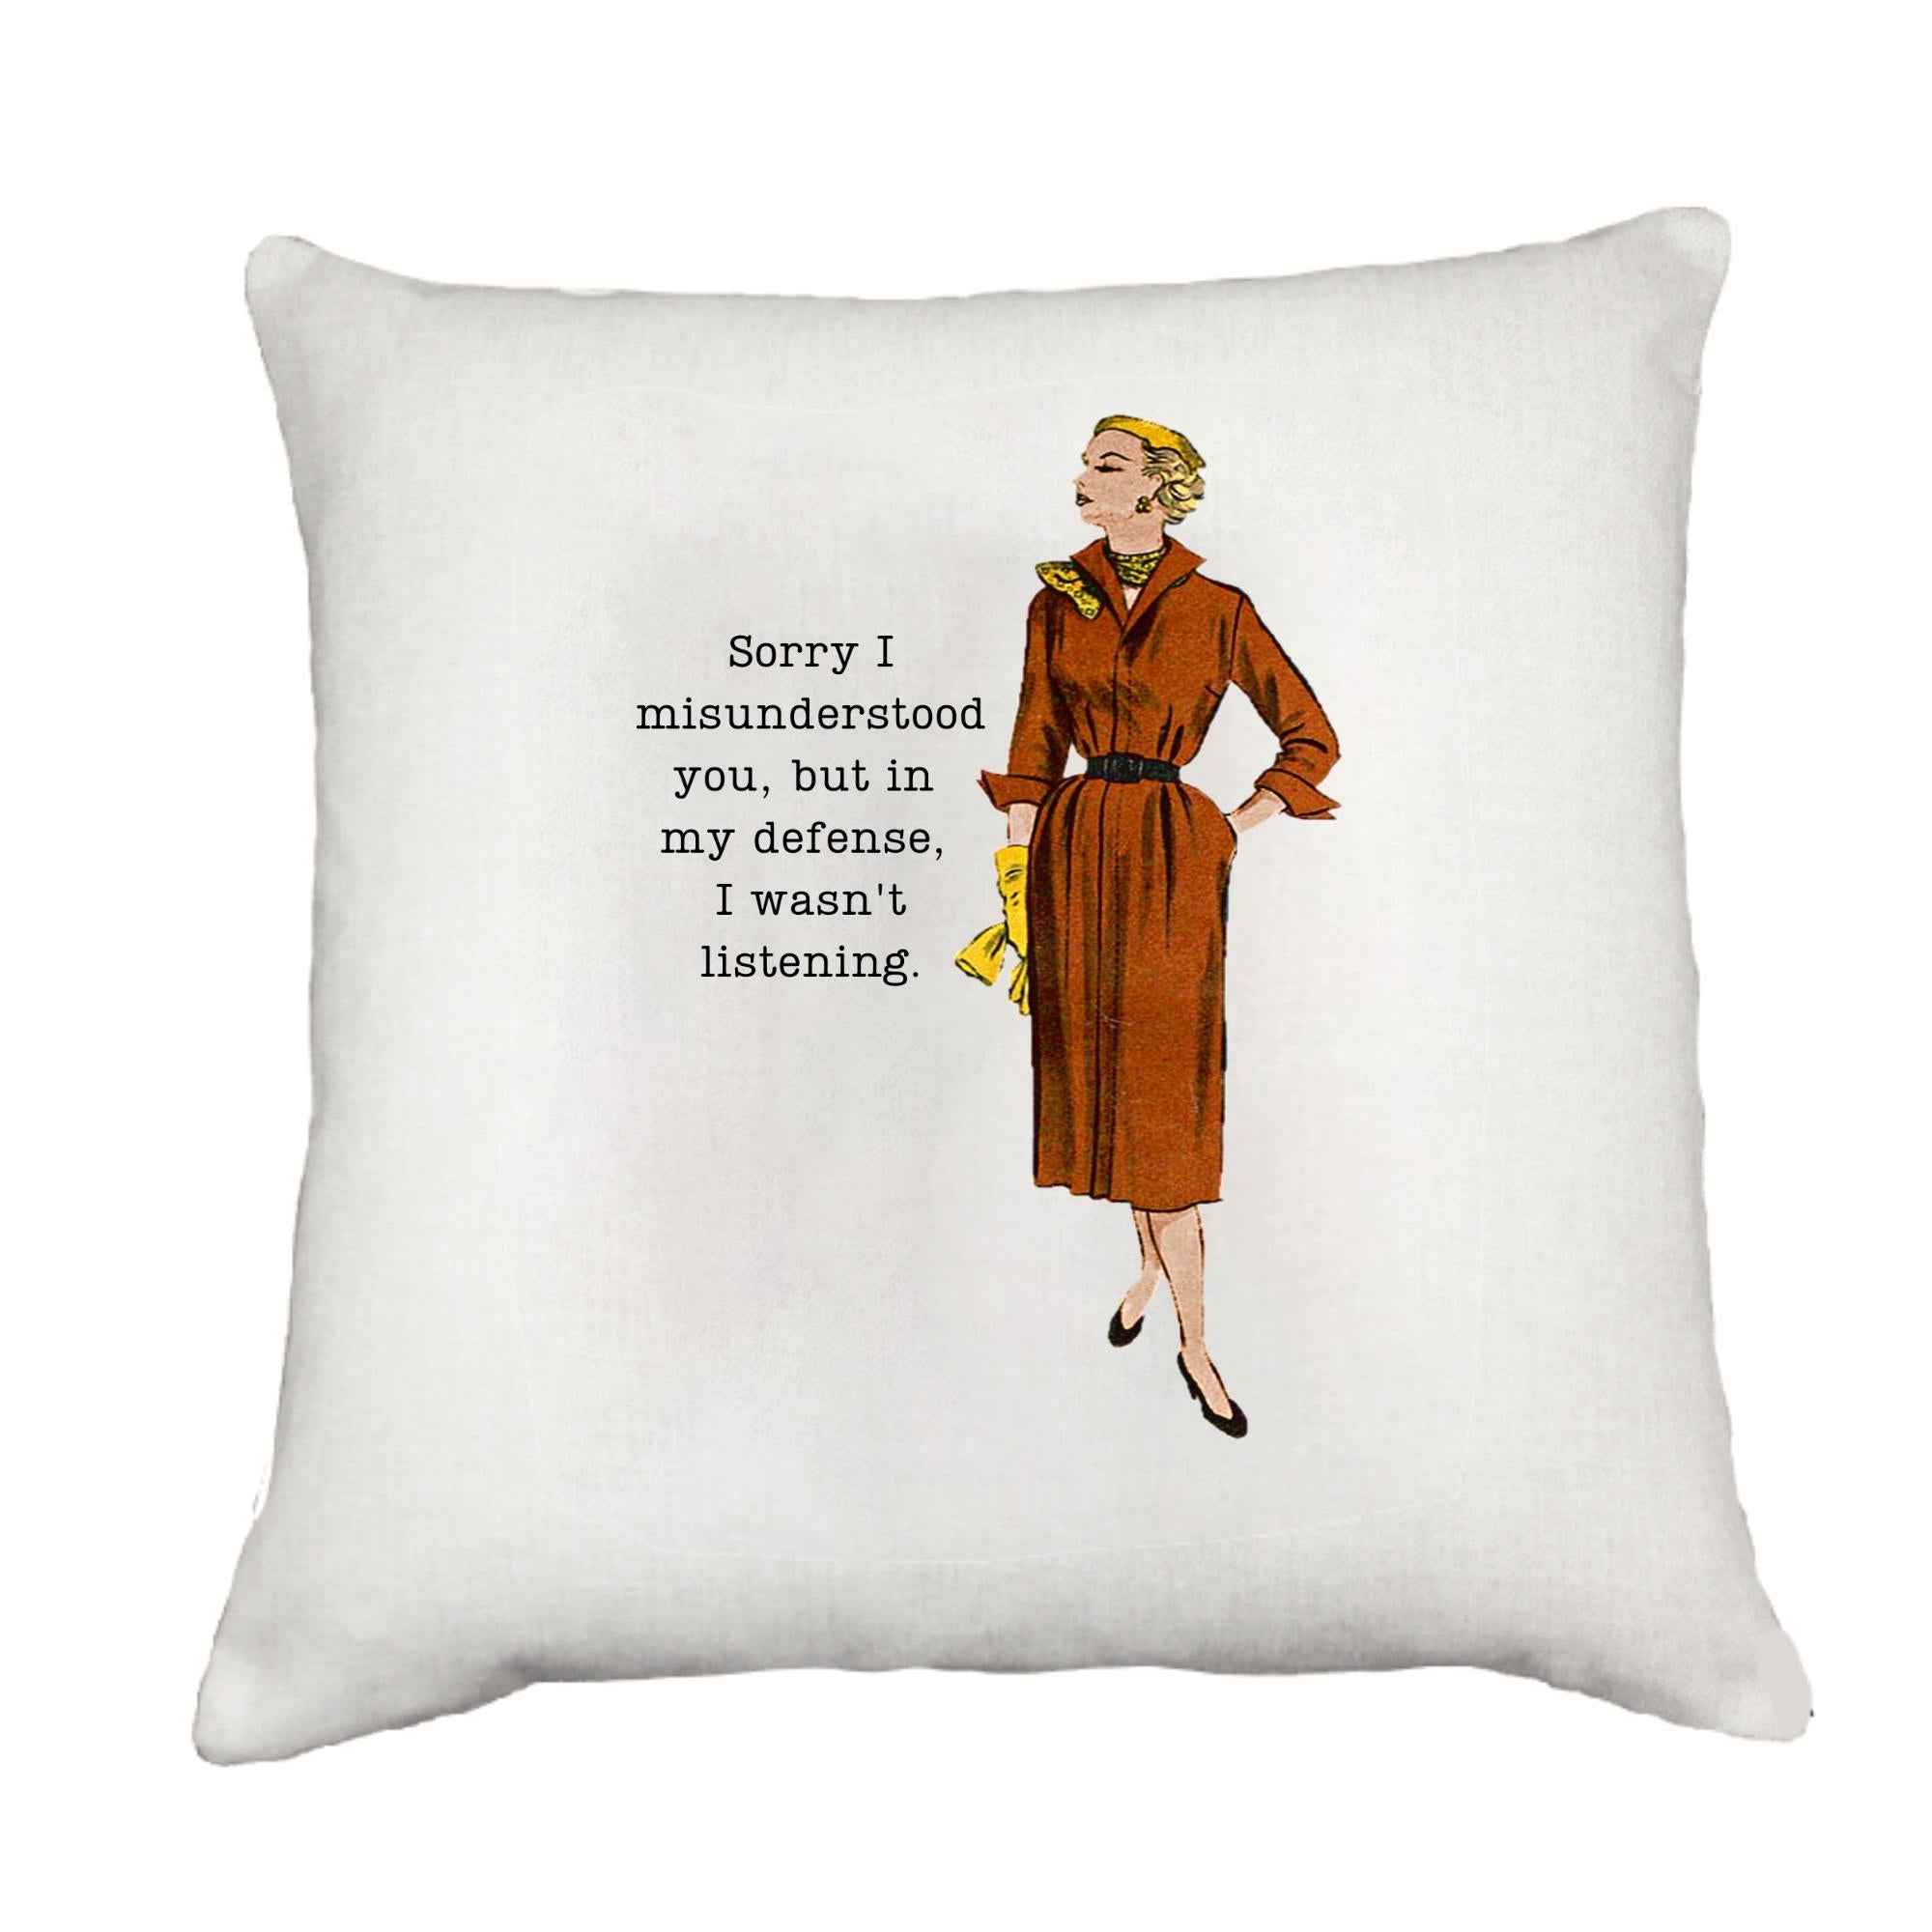 Misunderstood Cottage Pillow Throw/Decorative Pillow - Southern Sisters